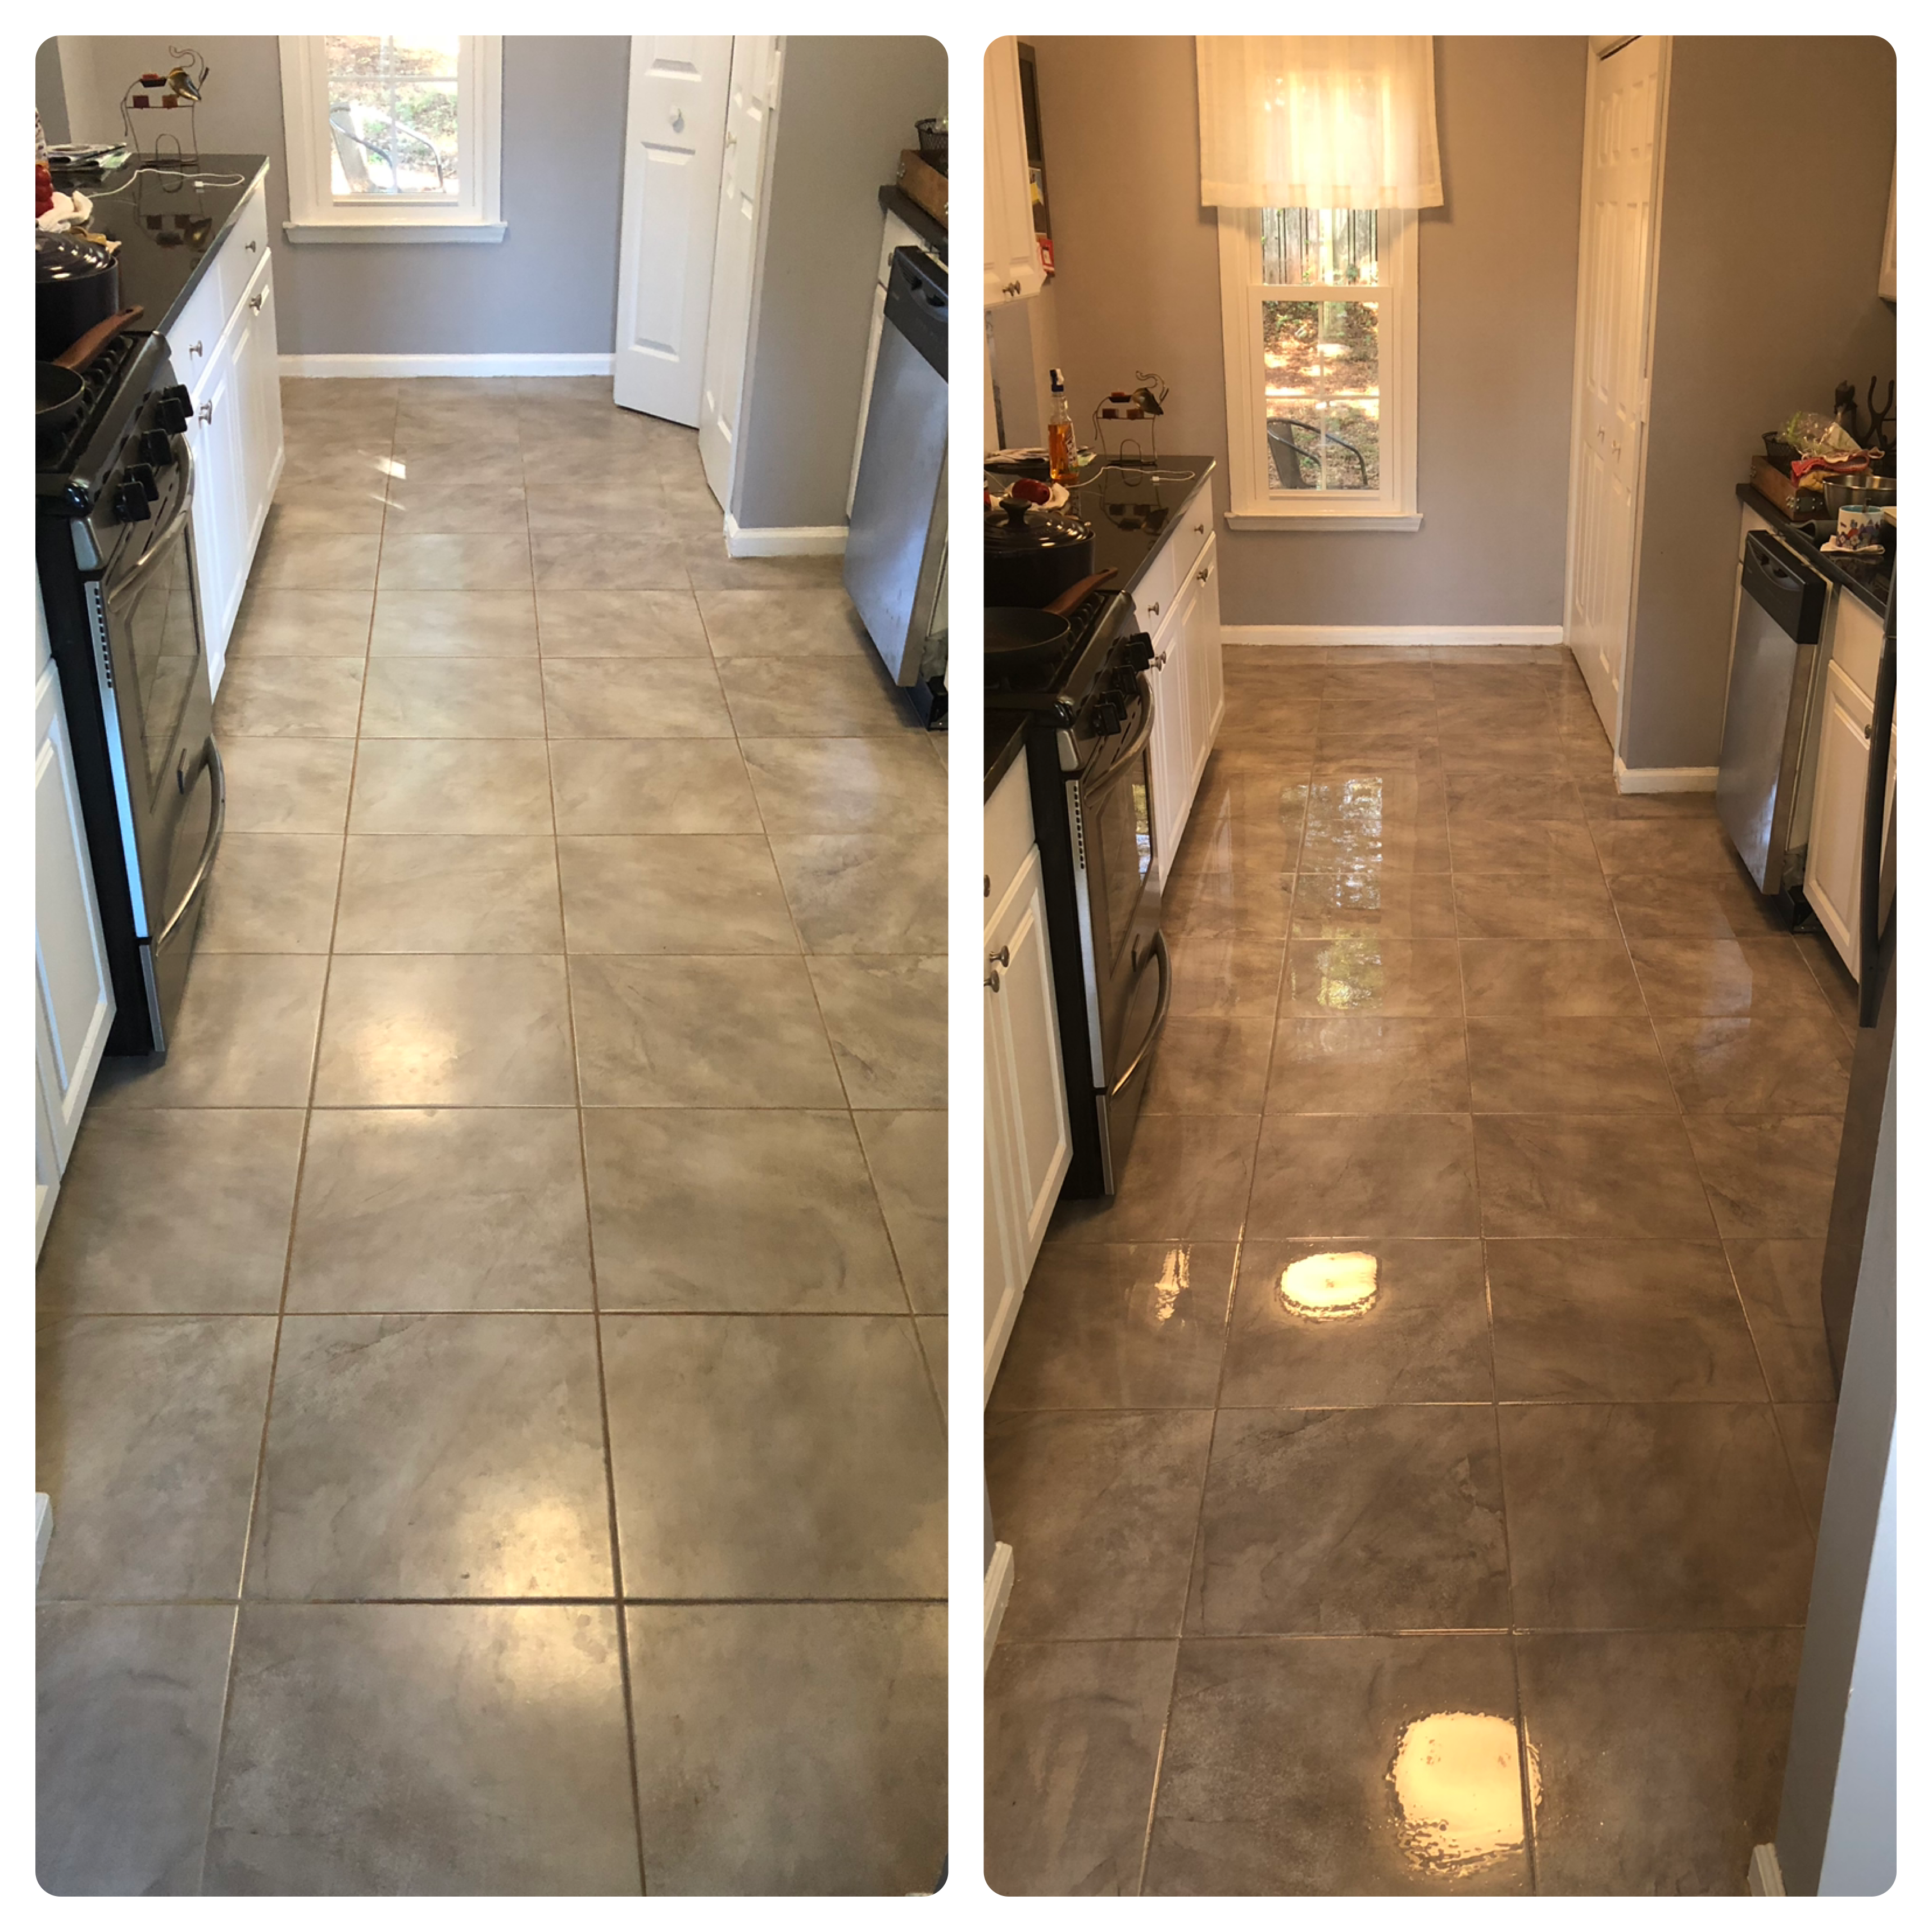 stone tile and grout cleaning, tile and grout cleaning, grout cleaning